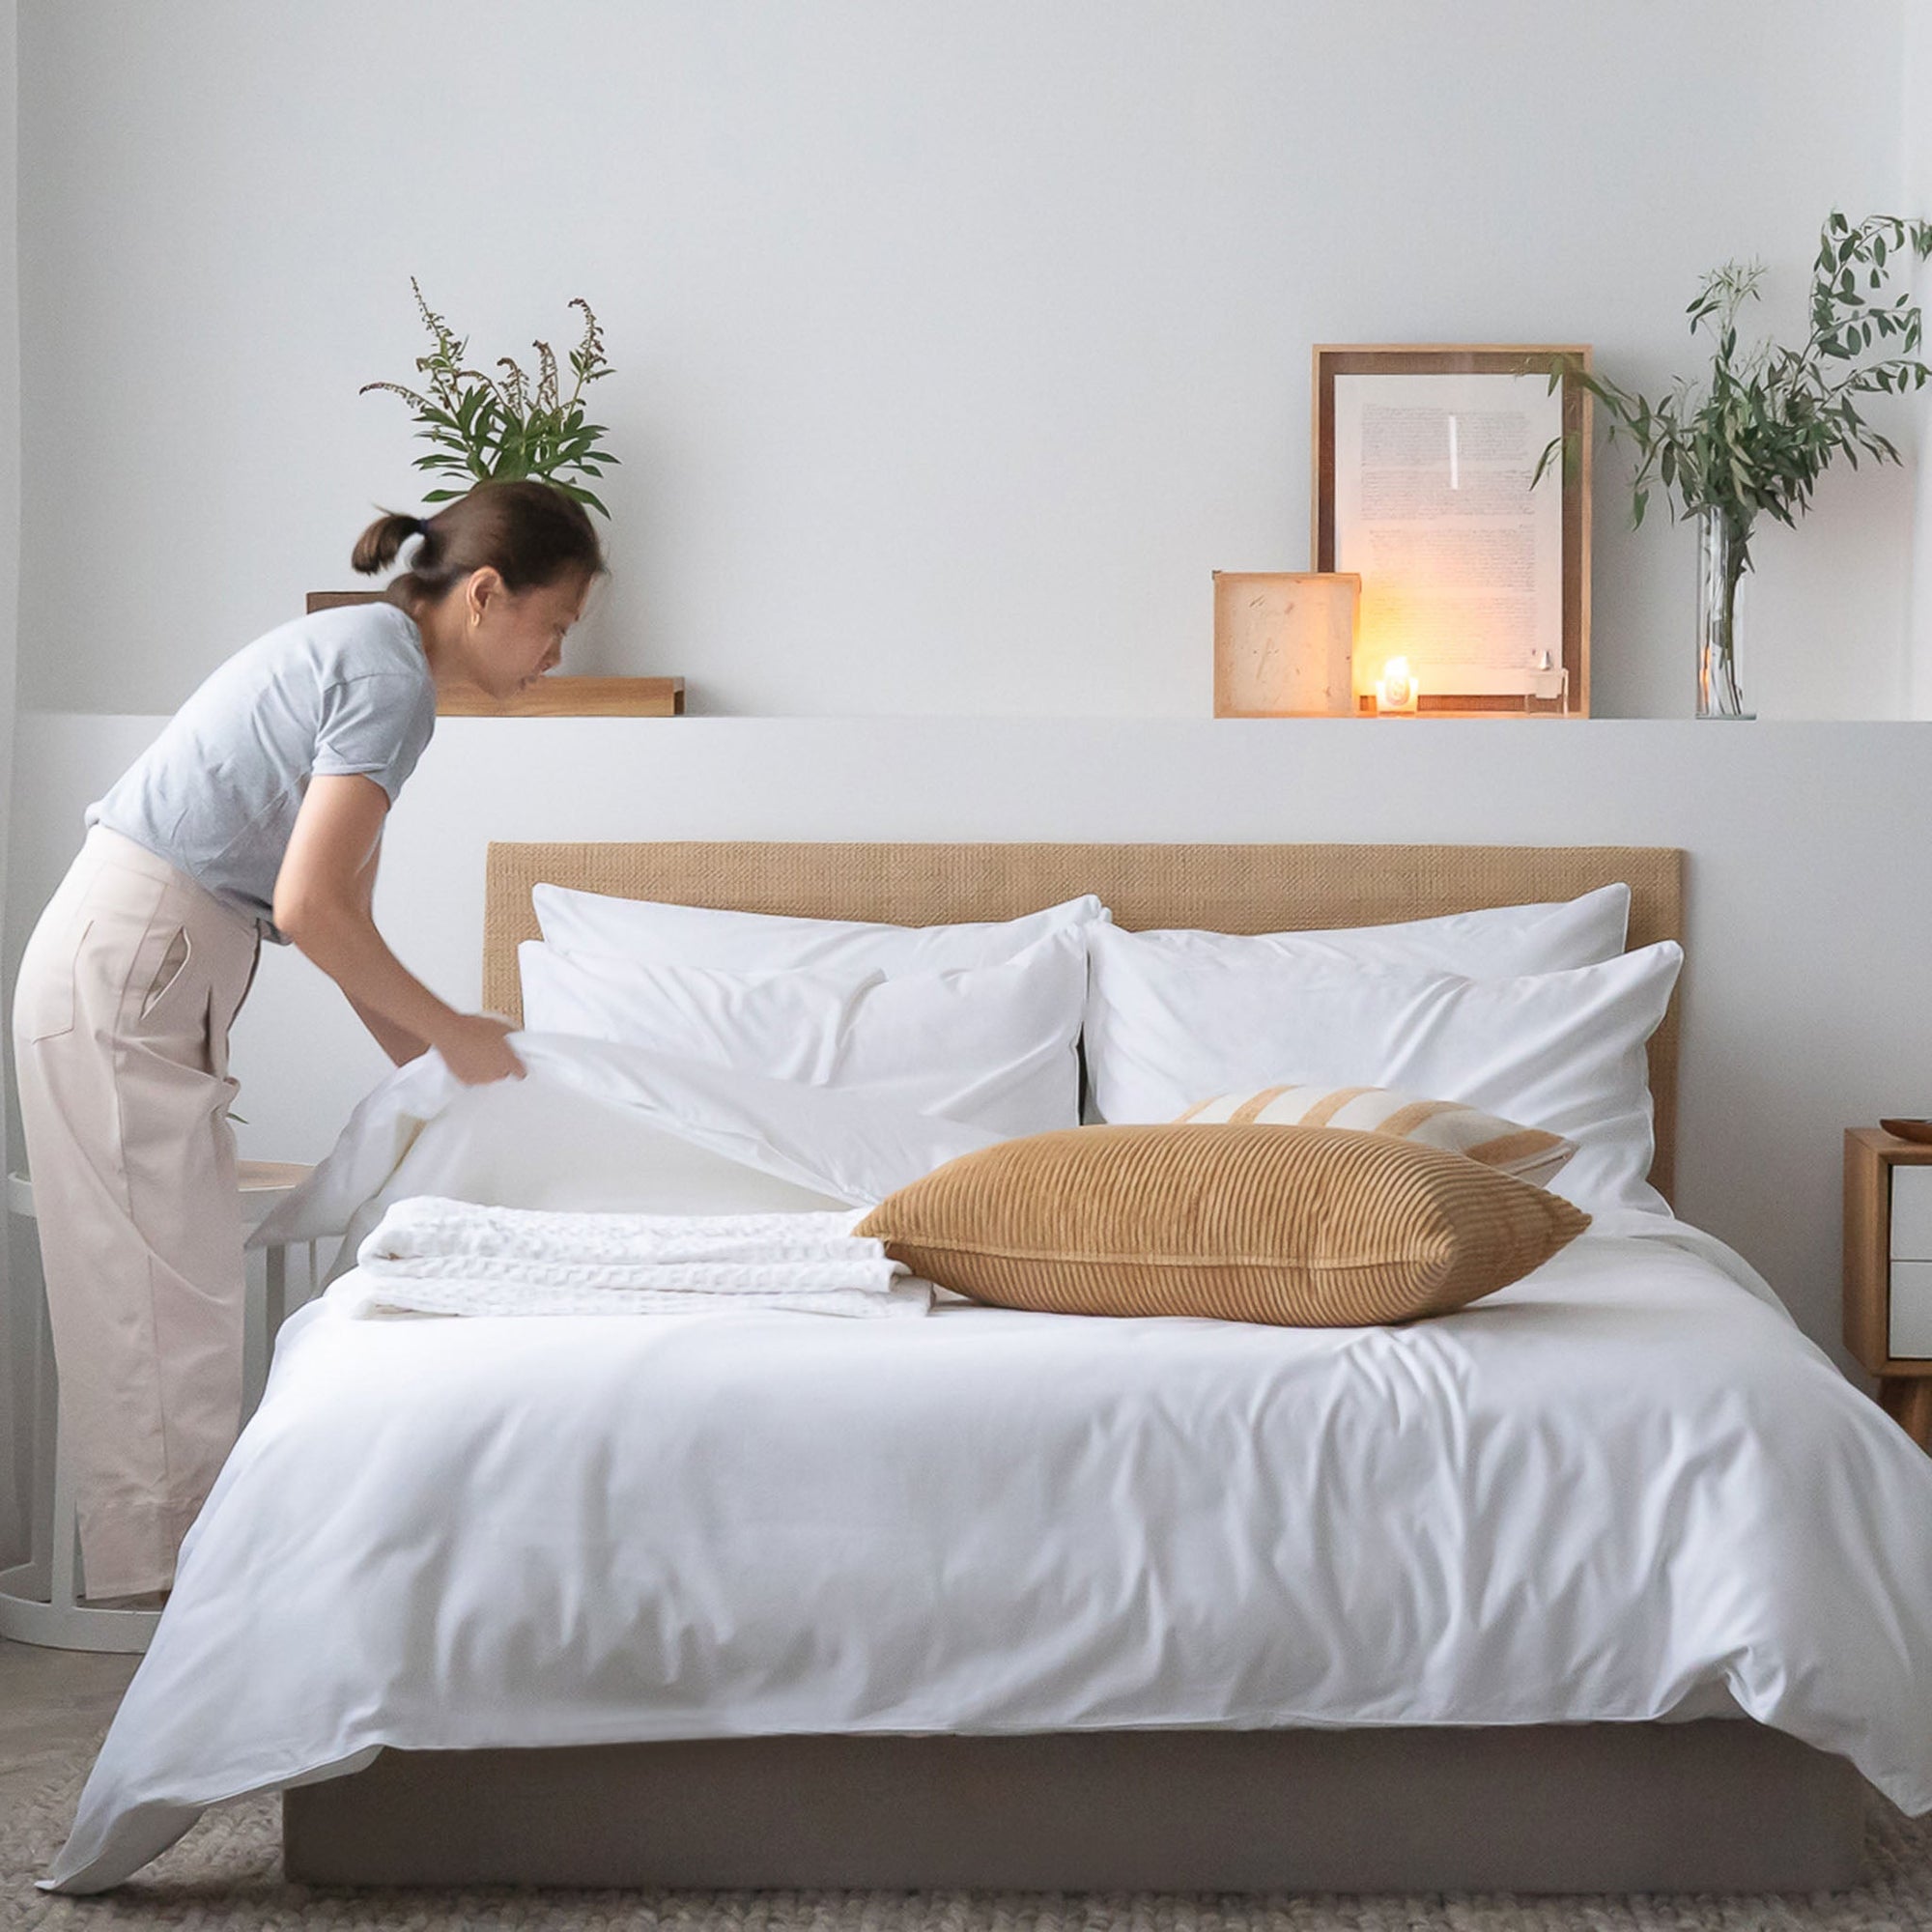 White Cotton Bed Sheets Fitted Sheet Set with Tencel fitted sheet, Tencel Pillow Case, Tencel Duvet Cover. Buy White Tencel Fitted bed sheet set at Weavve Home, Shop Egyptian Cotton Bed Sheets Singapore and Luxury Hotel Sheets. 400 High Thread Count Bed Sheet. 